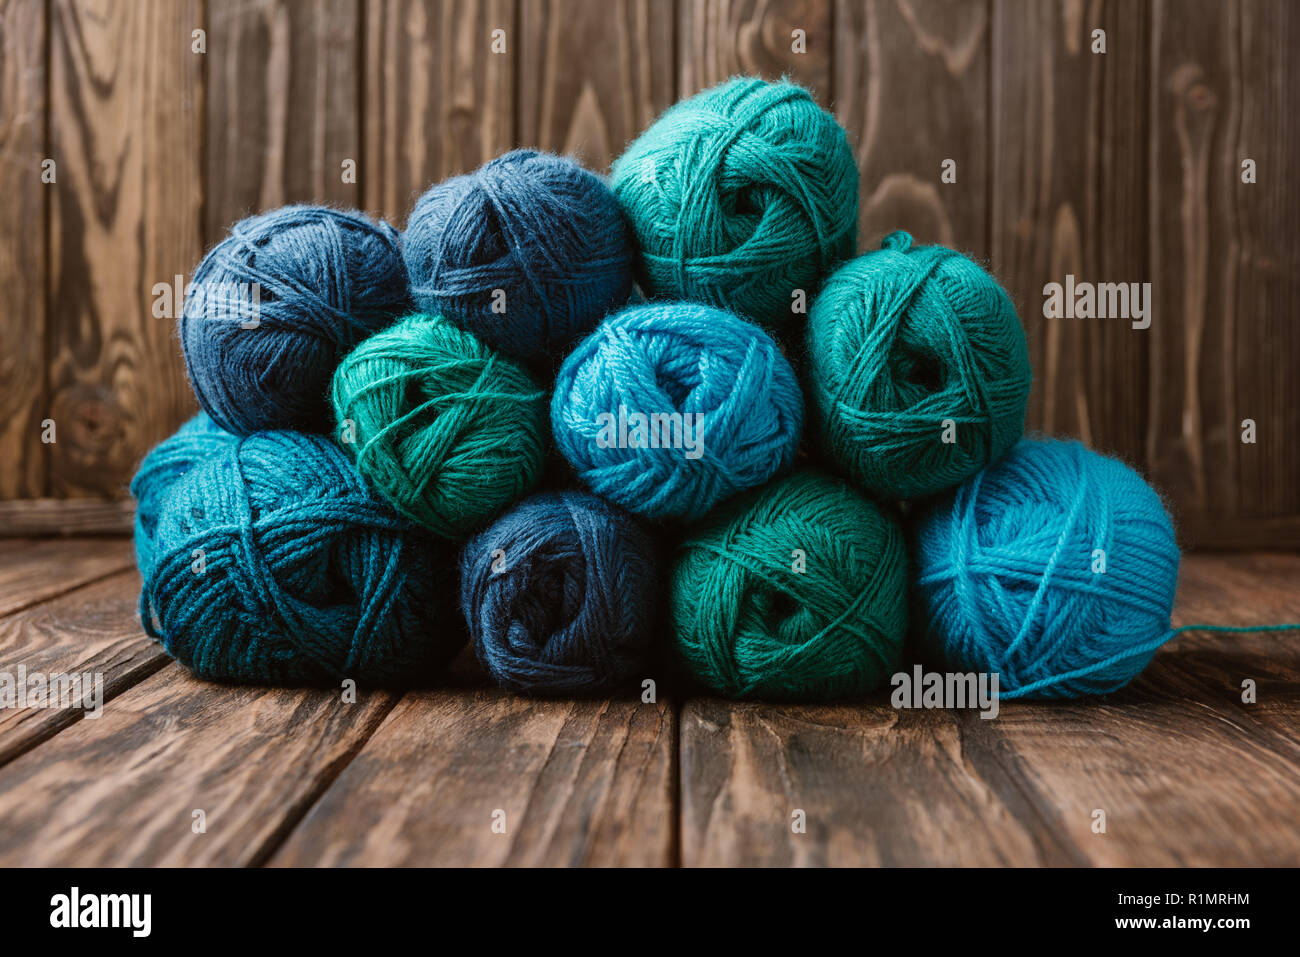 close up view of blue and green yarn clews on wooden surface Stock Photo